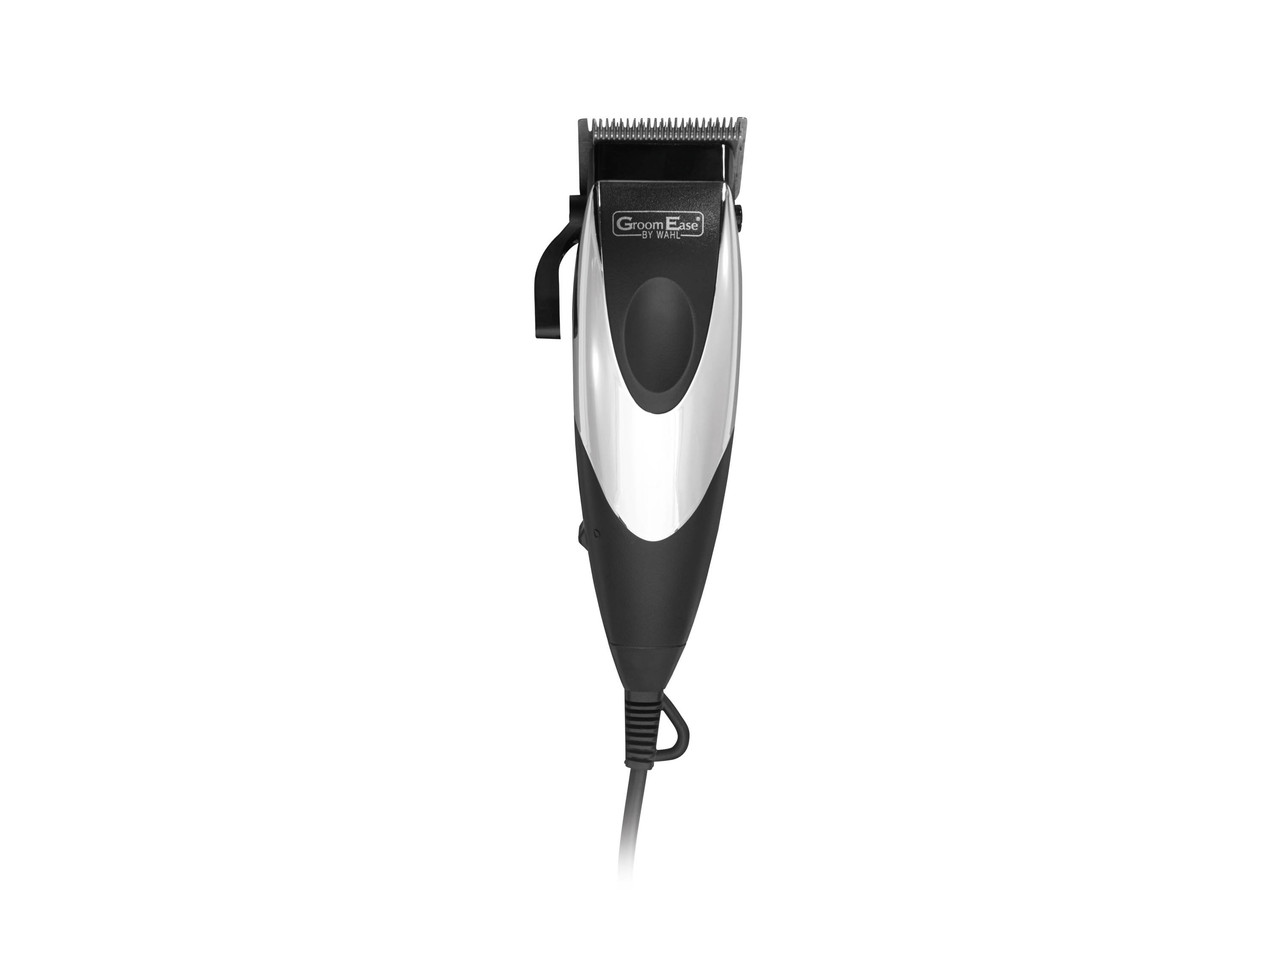 WAHL GROOM EASE Complete Hair Cutting Set